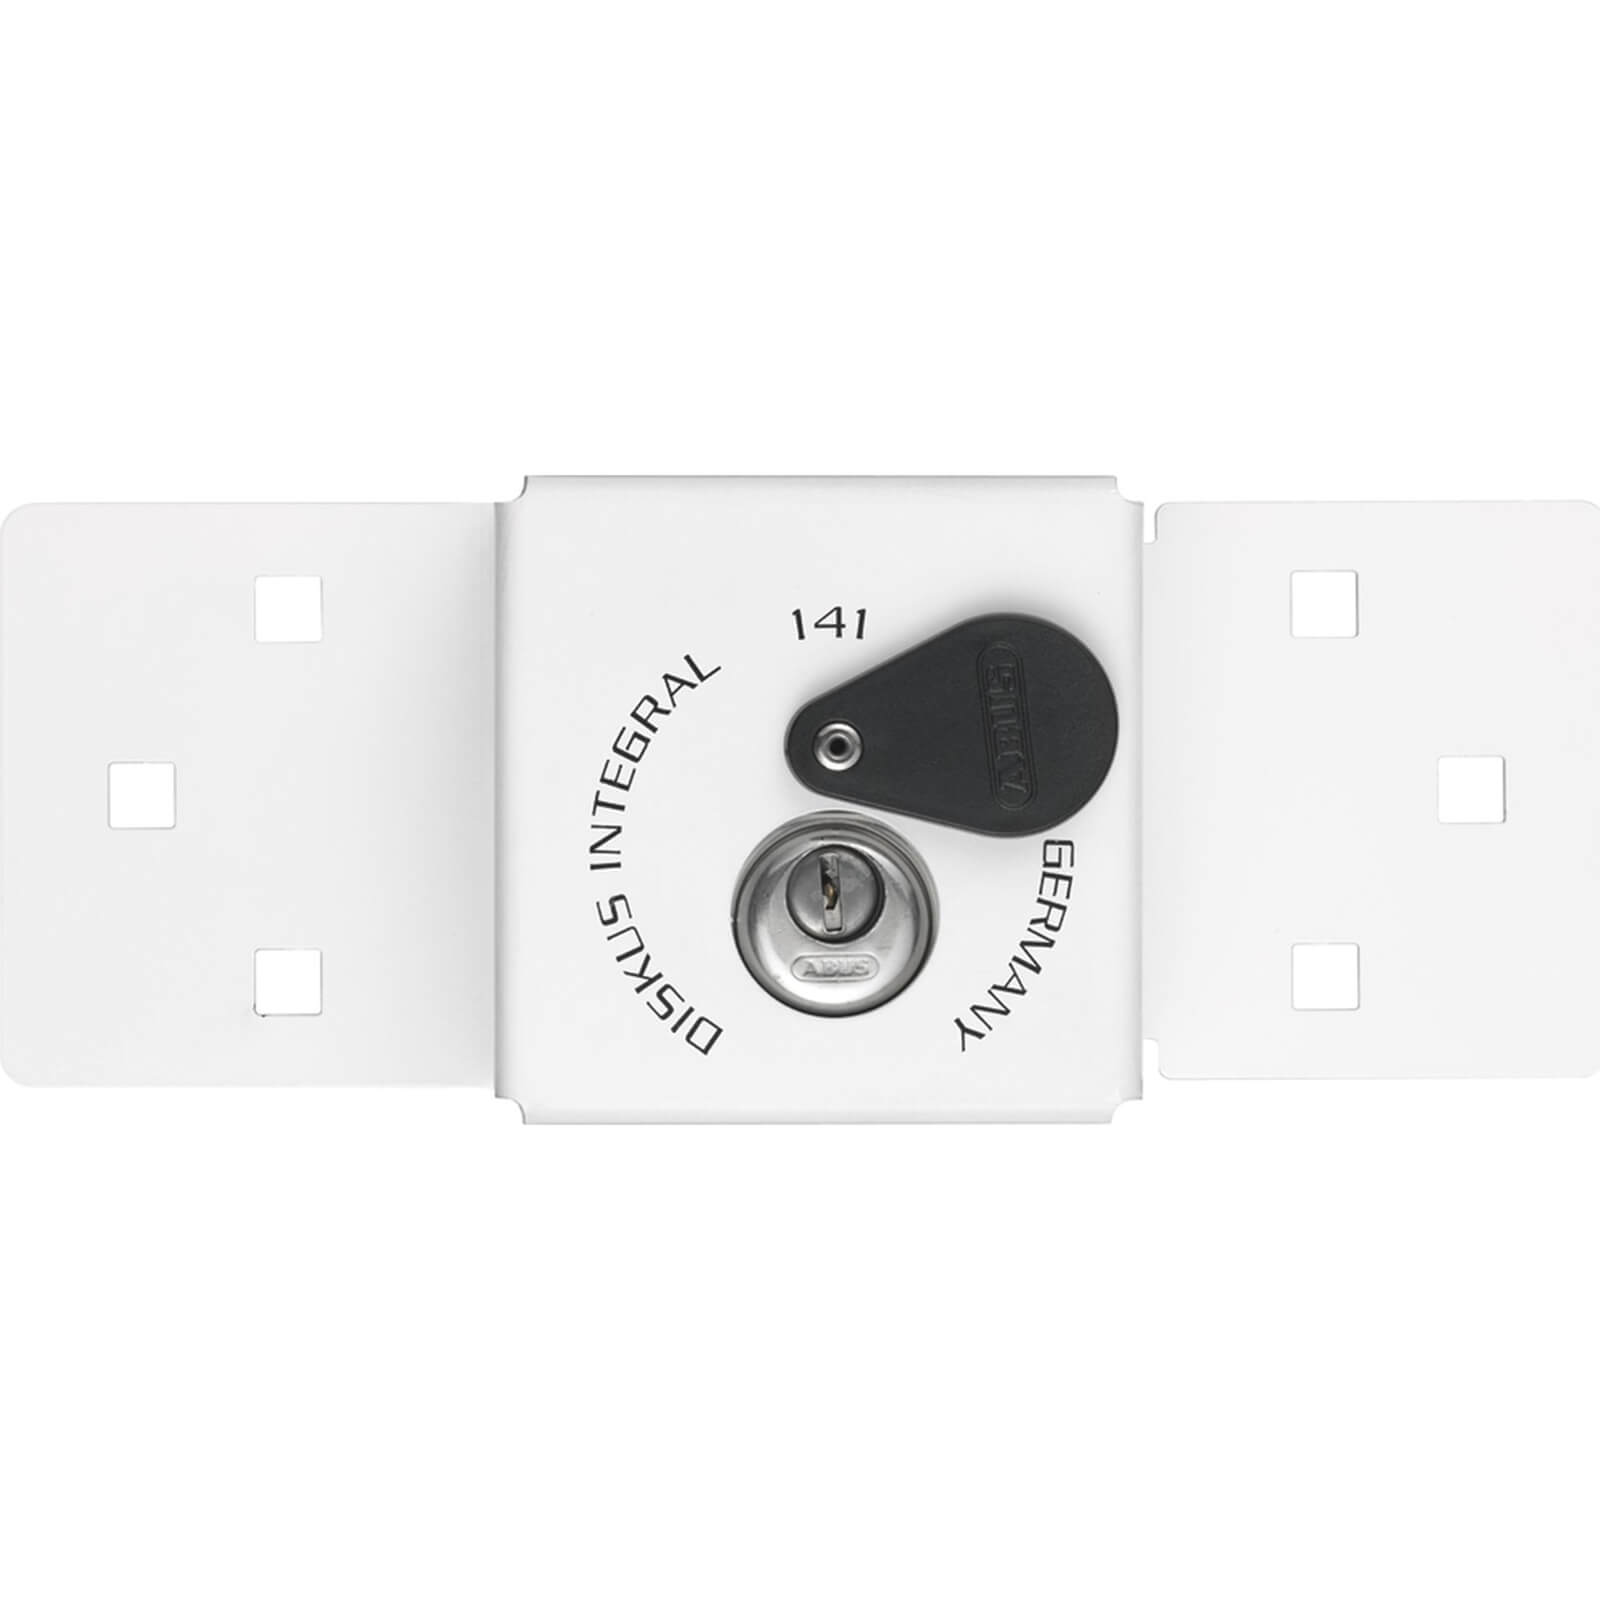 Image of Abus 141 Series White Integral Van and Shed Hasp with 2670 Diskus Padlock